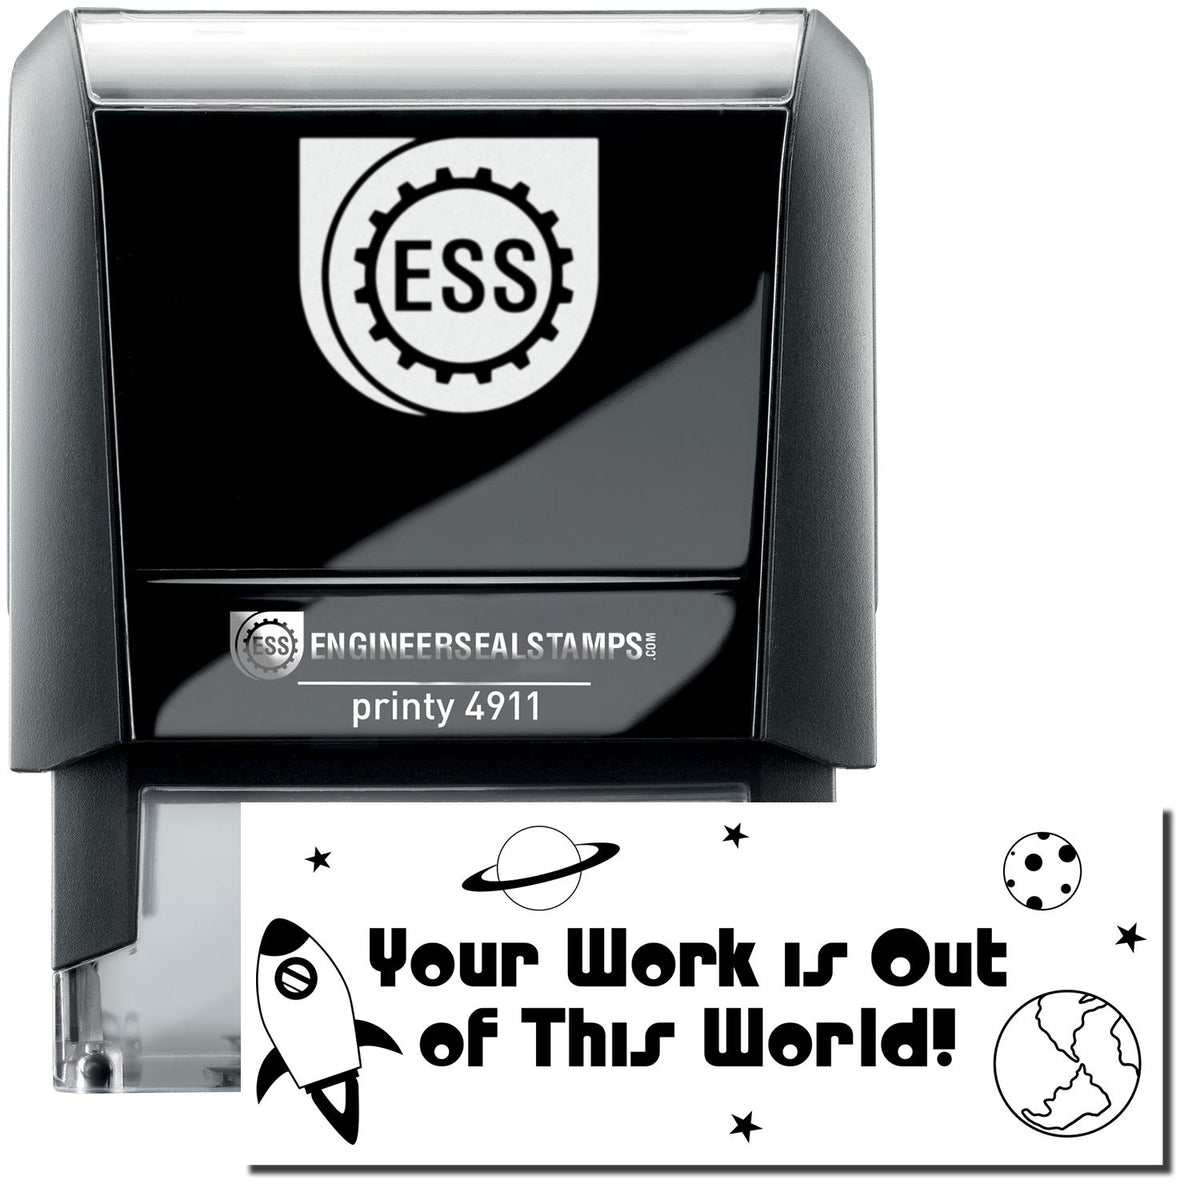 A self-inking stamp with a stamped image showing how the text &quot;Your Work is Out of This World!&quot; (in unique and wacky font surrounded by space icons like planets, moons, and a rocket ship) is displayed after stamping.